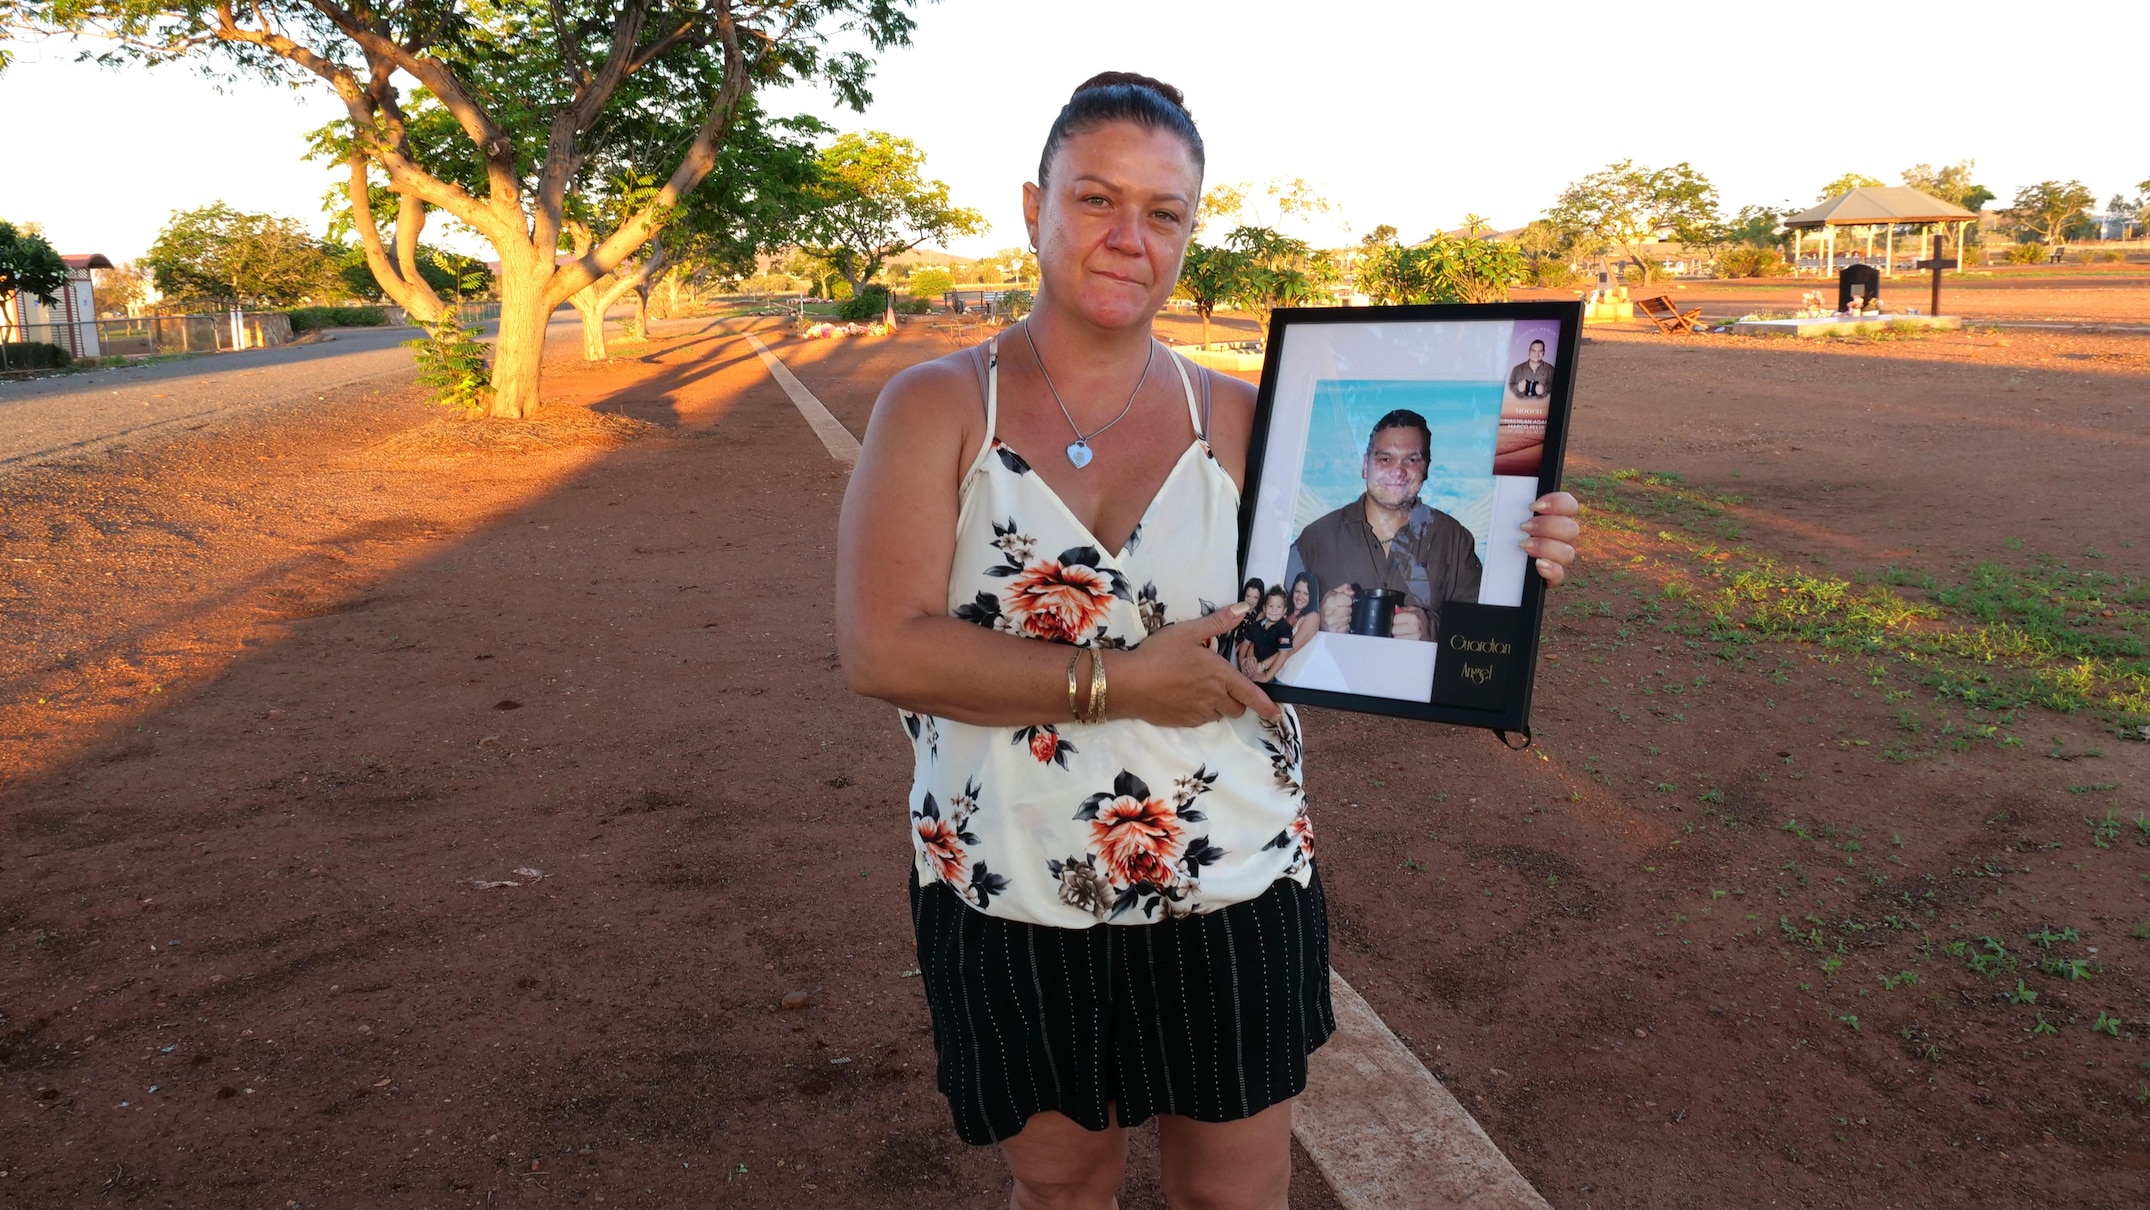 grieving mother calls for better mental health services in karratha after son's suicide